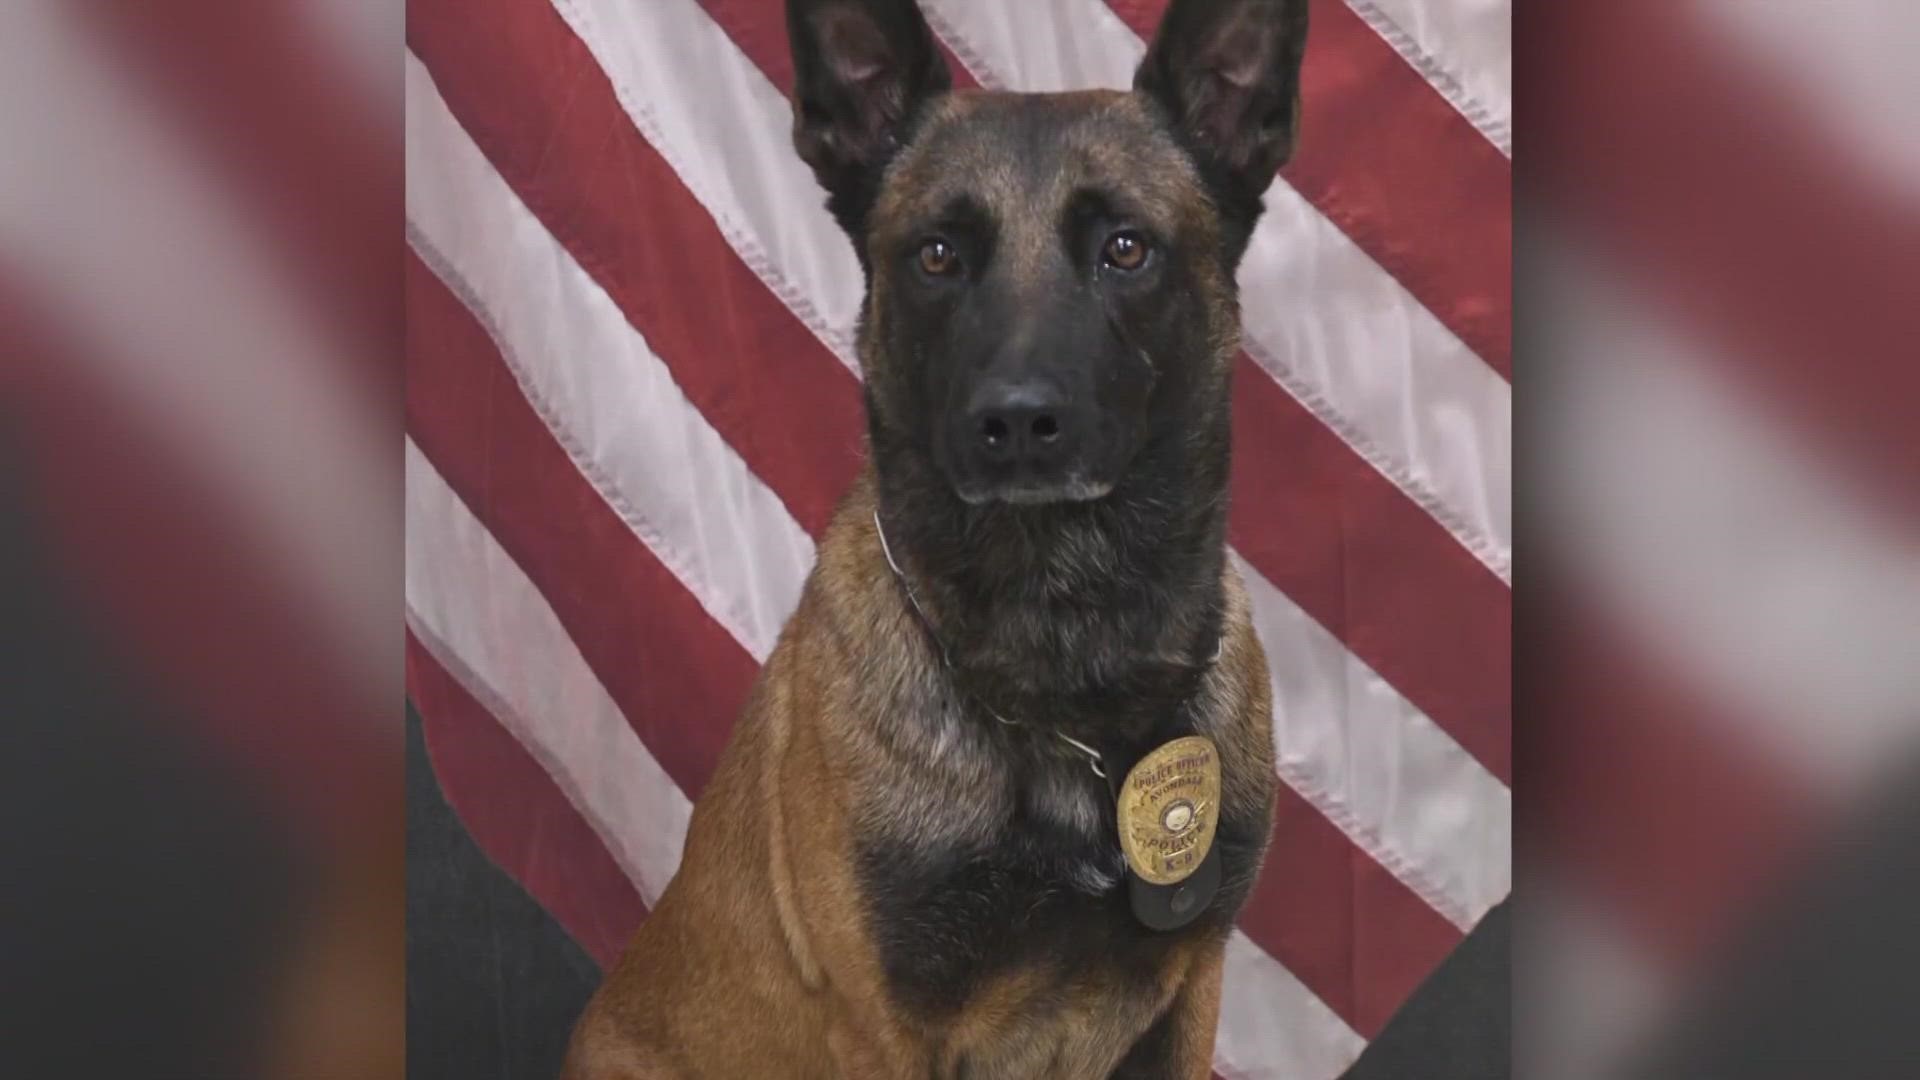 A missing K-9 named Rico sparked an inter-department search Monday morning as authorities cautioned that the dog may have been dangerous.